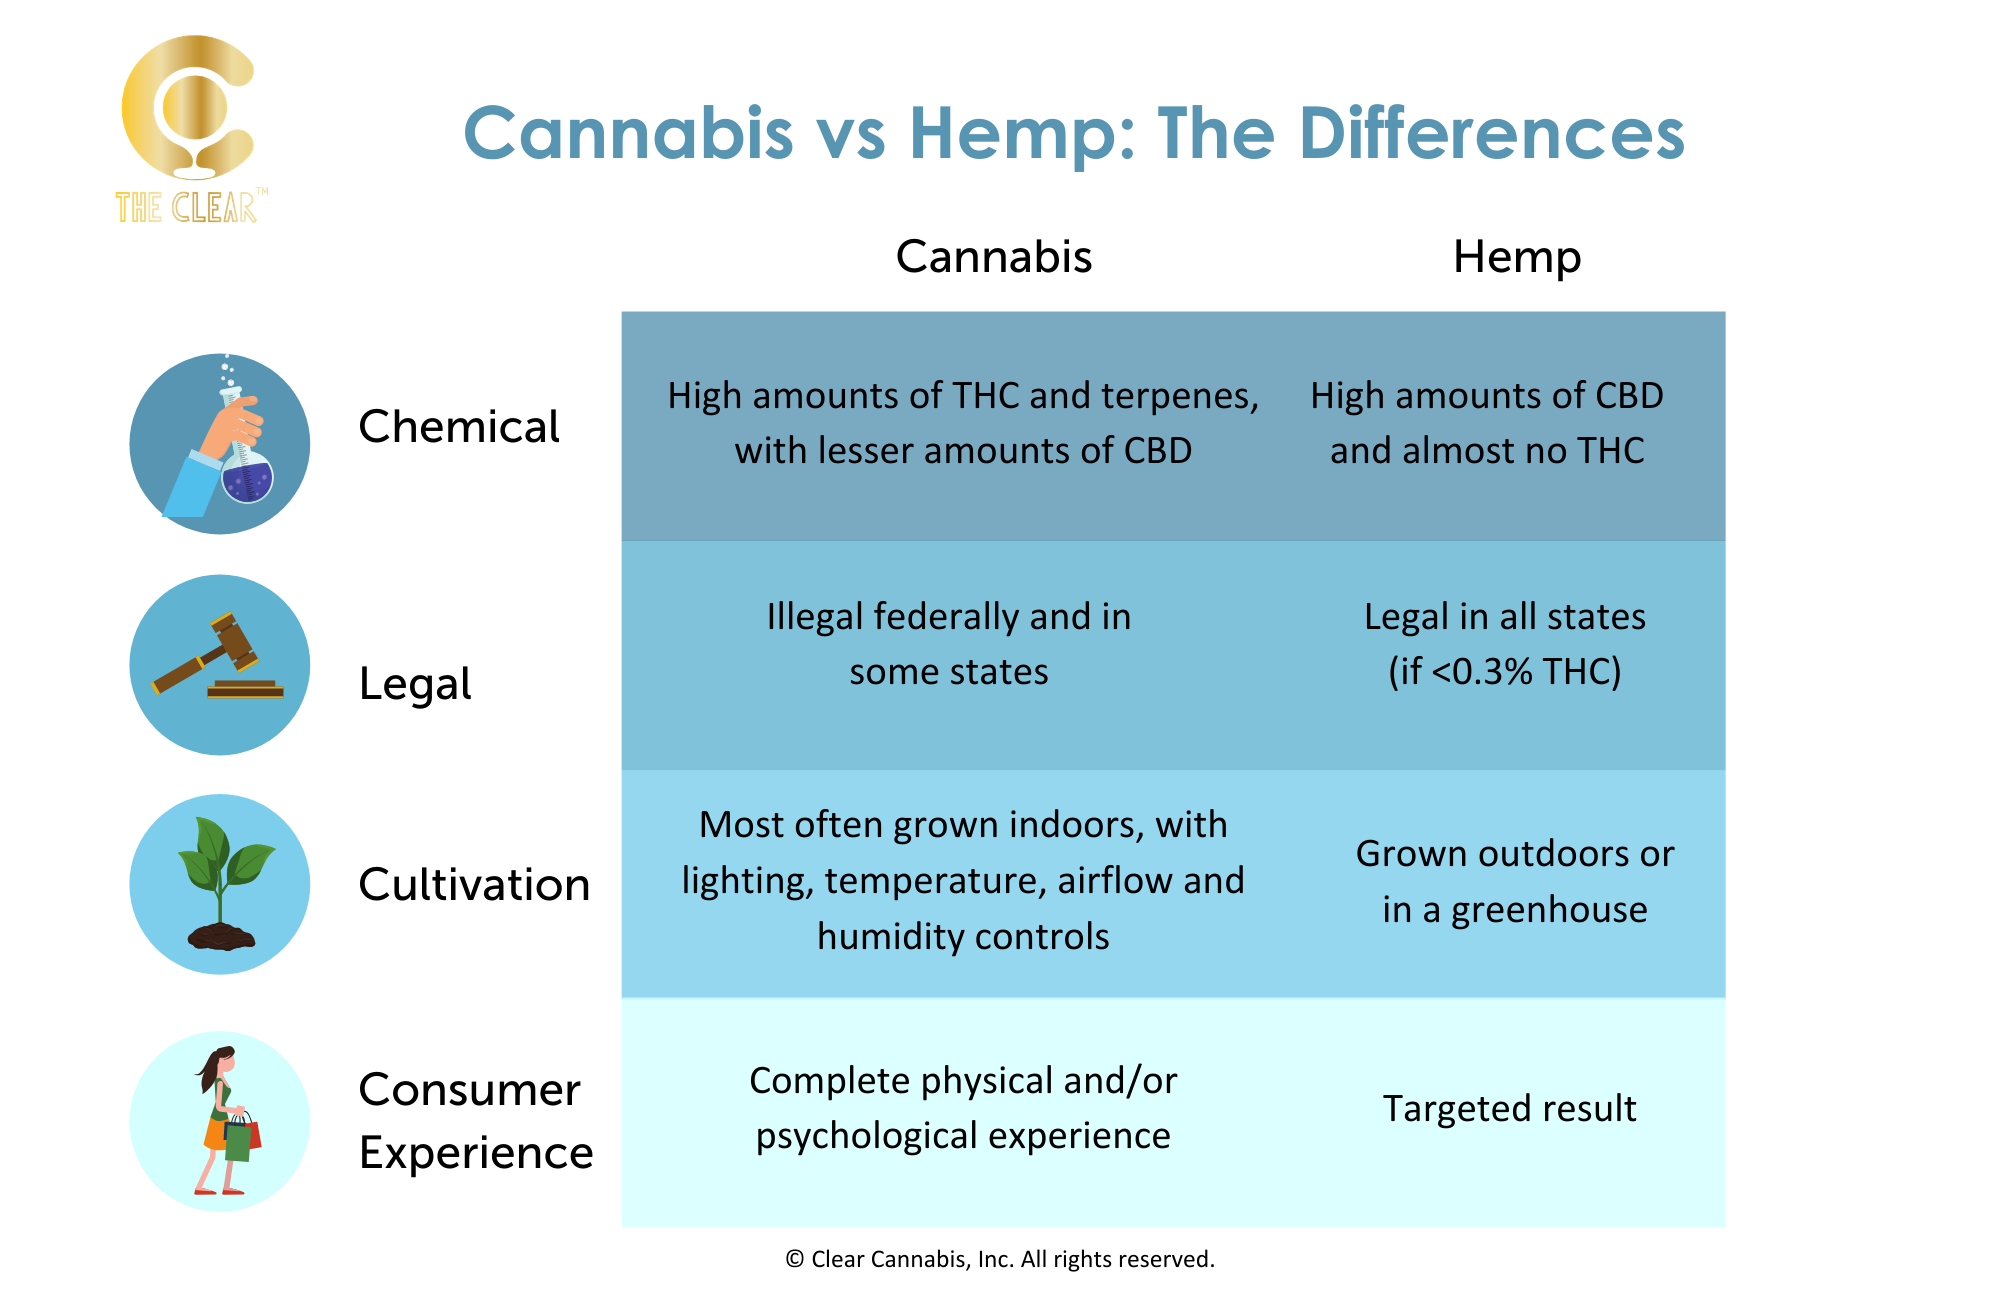 A table by The Clear with the Title ‘Cannabis vs Hemp: The Differences’. The left column lists four categories of key differences: Chemical, Legal, Cultivation, and Consumer Experience. The table shows, chemically, cannabis has high amounts of THC and terpenes, with lesser amounts of CBD, and hemp has high amounts of CBD and almost no THC. Legally, cannabis is illegal federally and in some states, and hemp is legal in all states (if <0.3% THC). For cultivation, cannabis is most often grown indoors, with lighting, temperature, airflow, and humidity controls, and hemp is grown outdoors or in a greenhouse. For consumer experience, cannabis has a complete physical and/or psychological experience, and hemp has targeted results. 